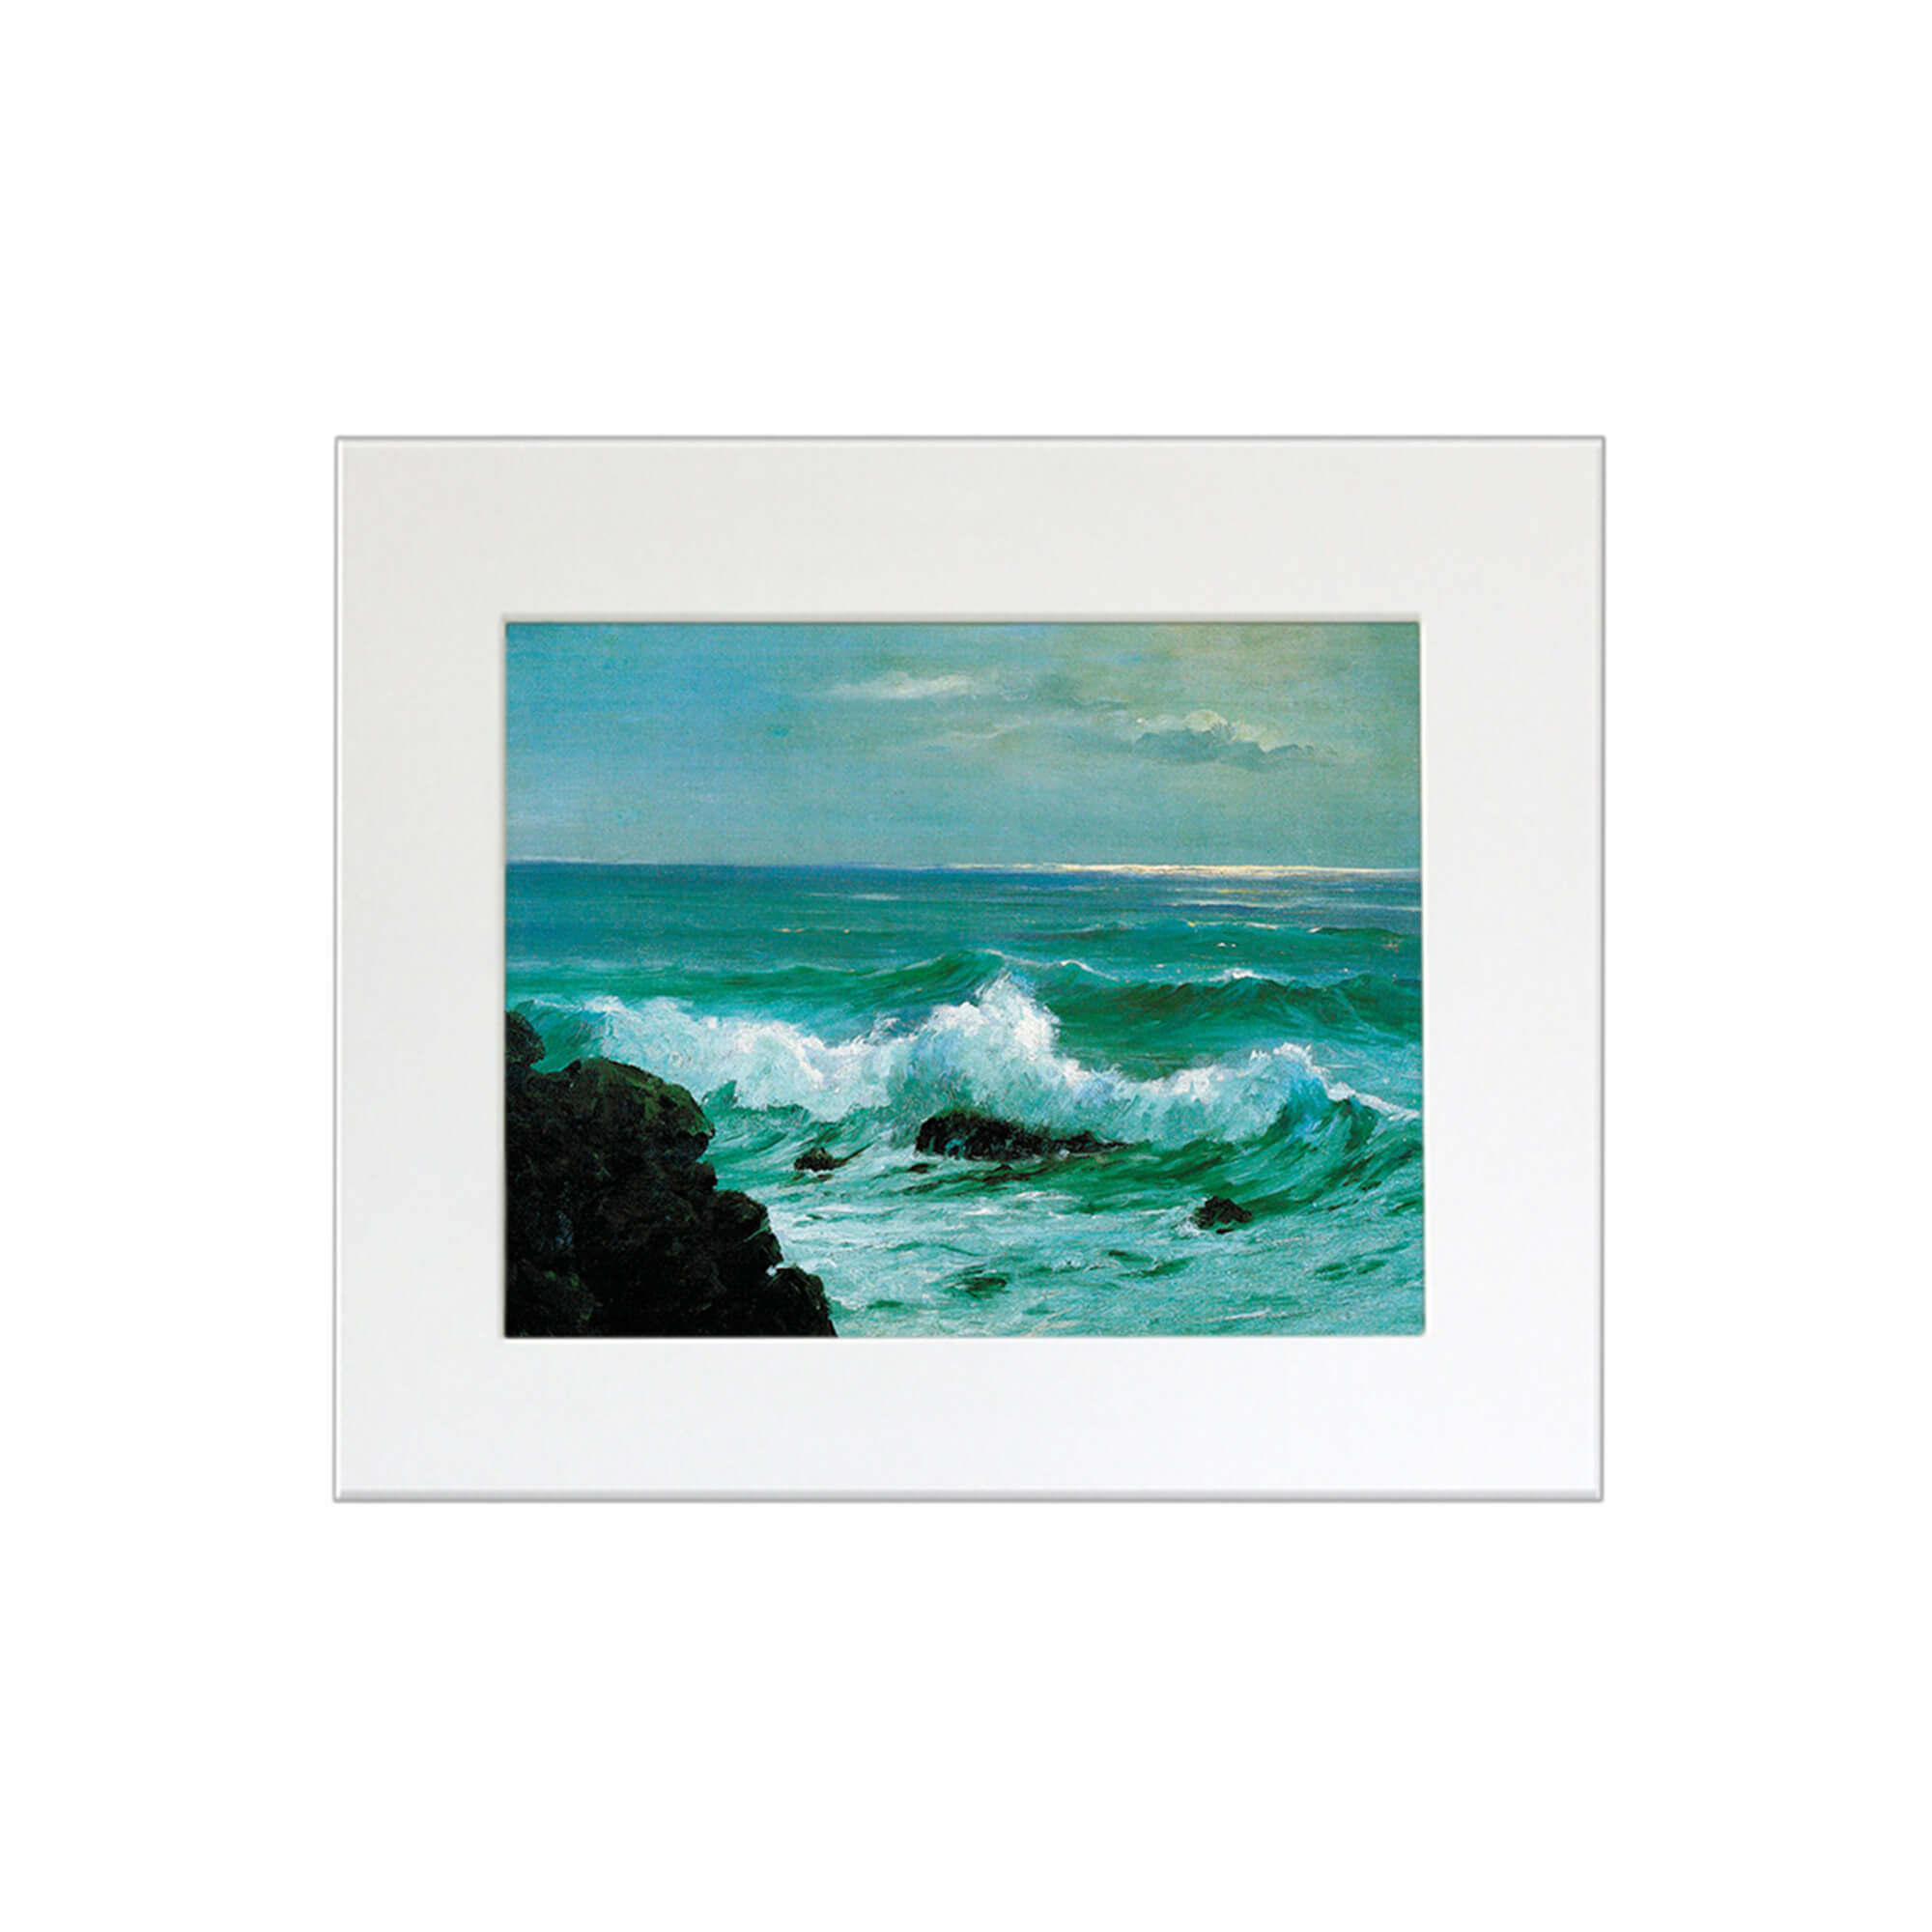 Vintage painting in ma mat of teal colored seascape